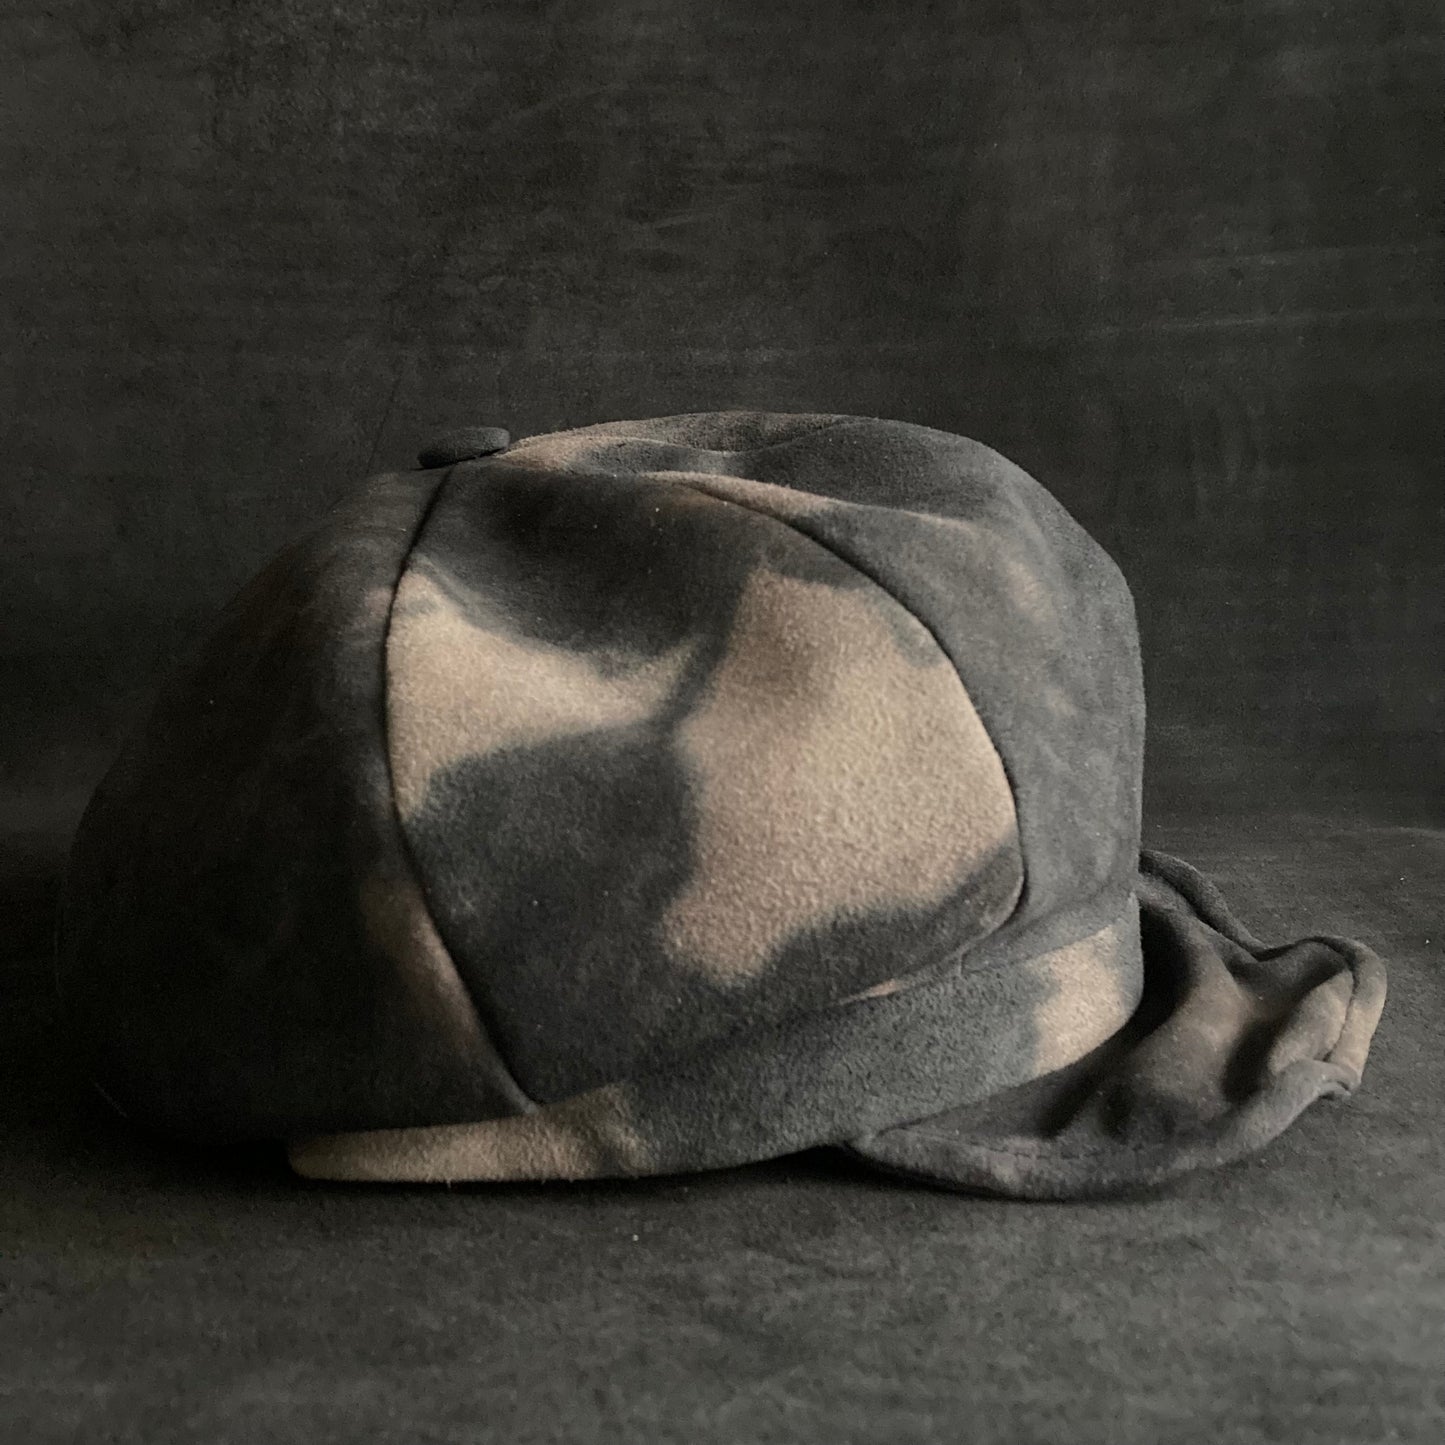 Mottled gray leather casquette